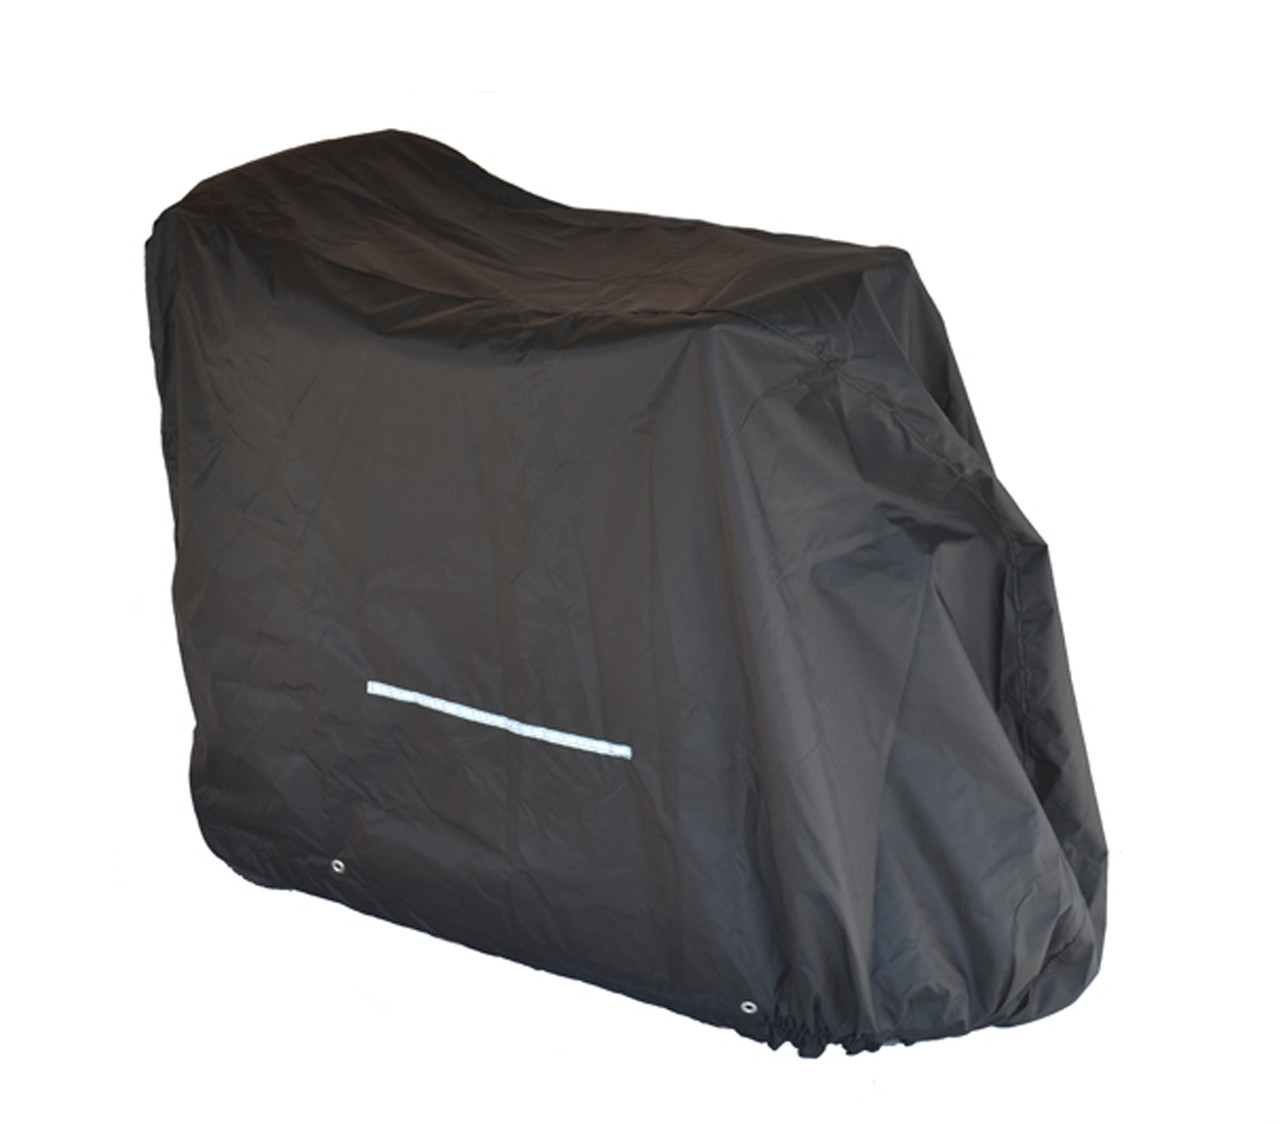 Mobility Scooter Cover, Standard Weight Good Life Medical